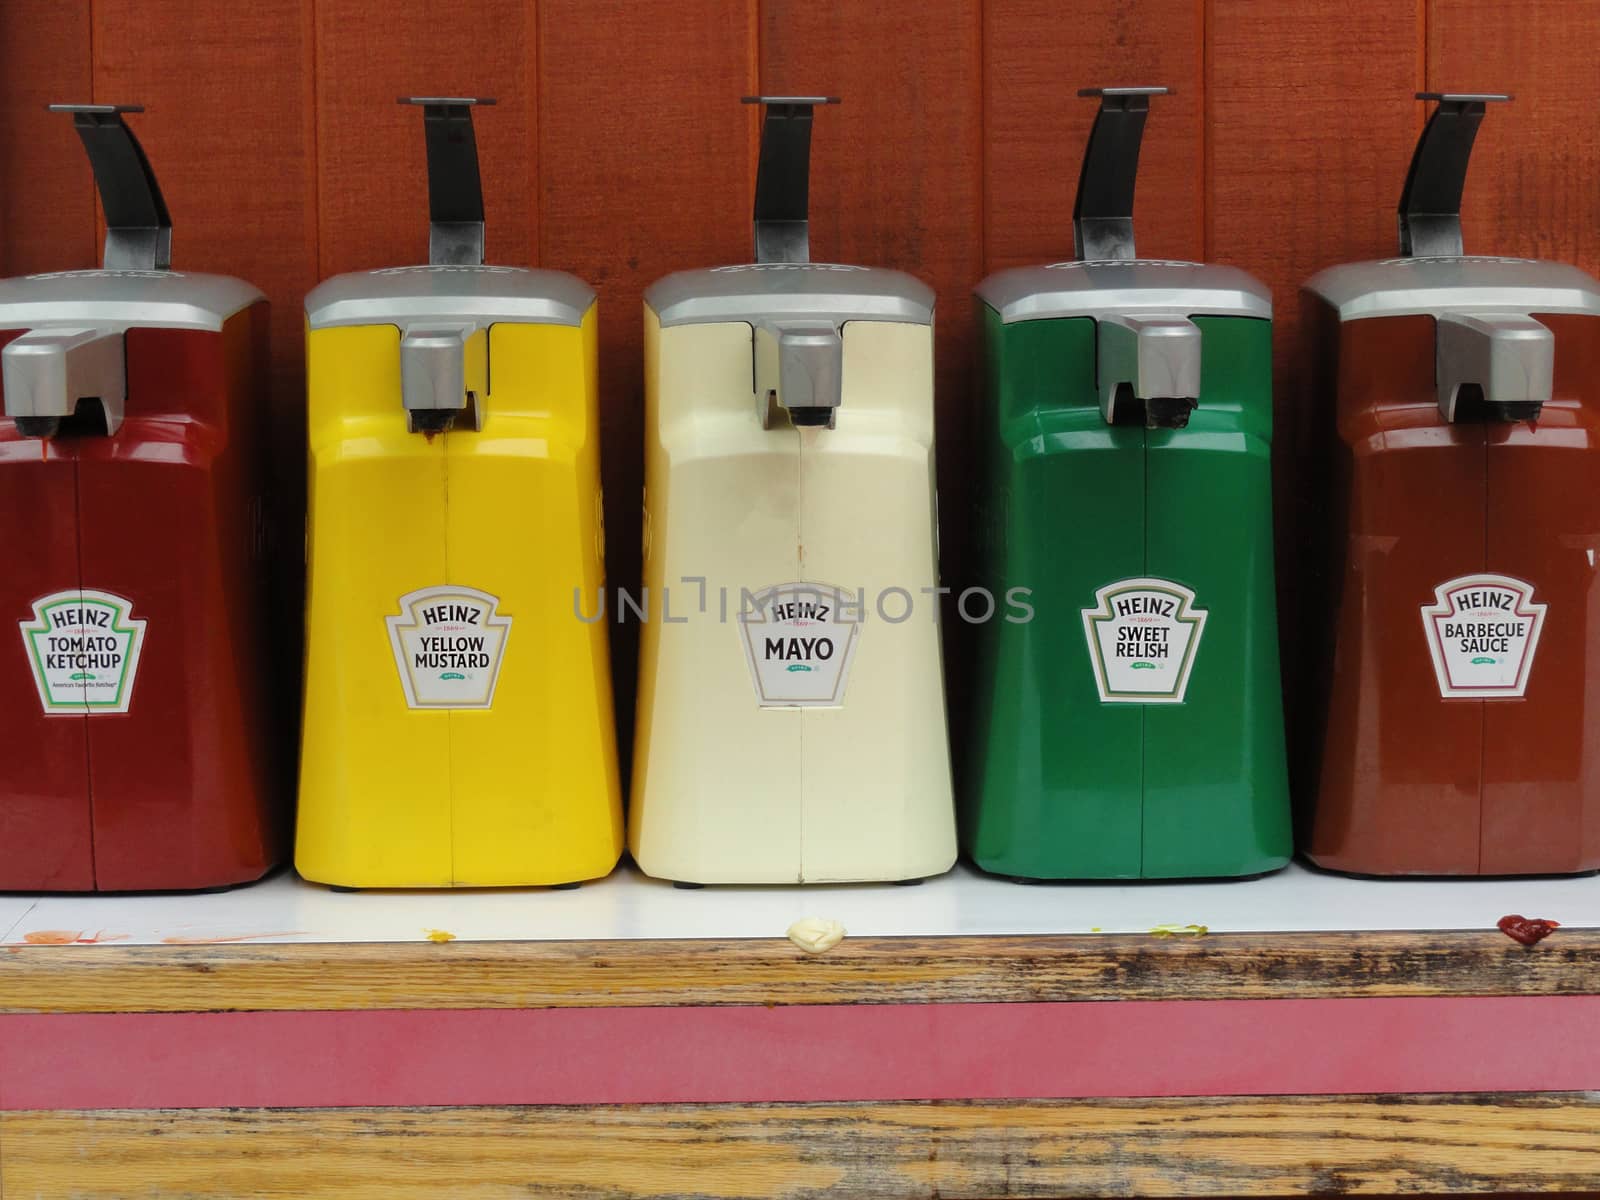 Big Sur, USA - July 24 2010: Heinz Condiments Dispenser Pack in a Fast Food Restaurant. Heinz is an American Food Company